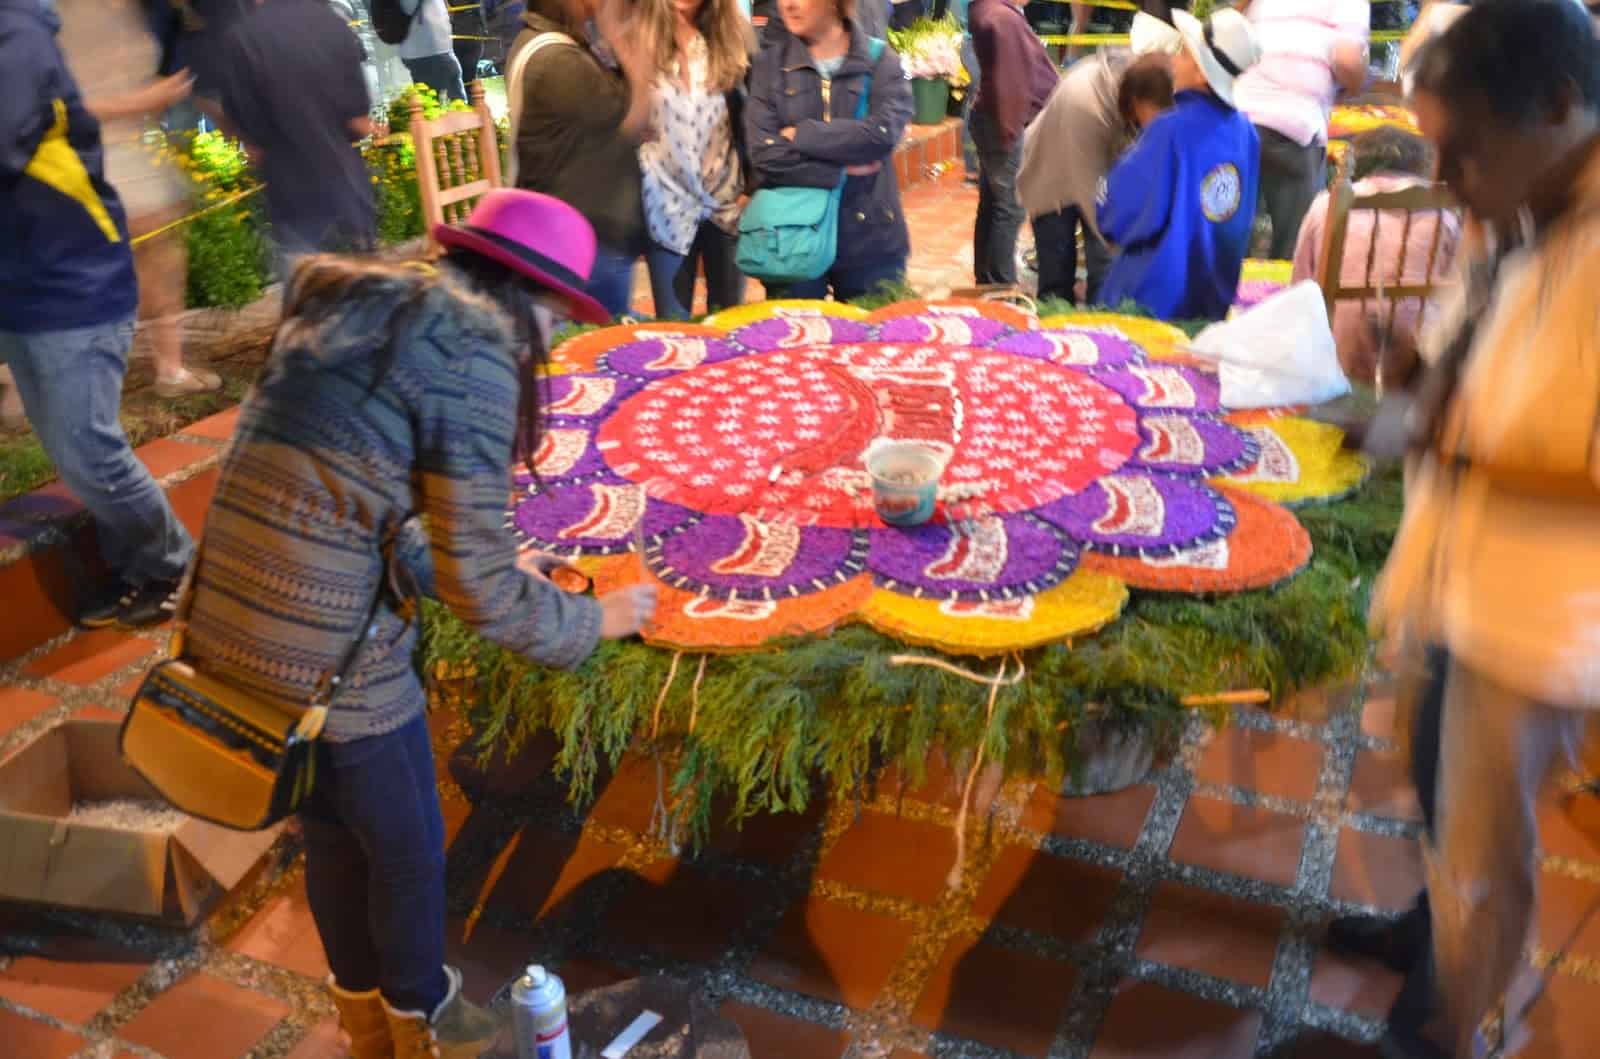 A woman making a float at the Silleteros Tour in the Flower Festival, Medellín, Antioquia, Colombia